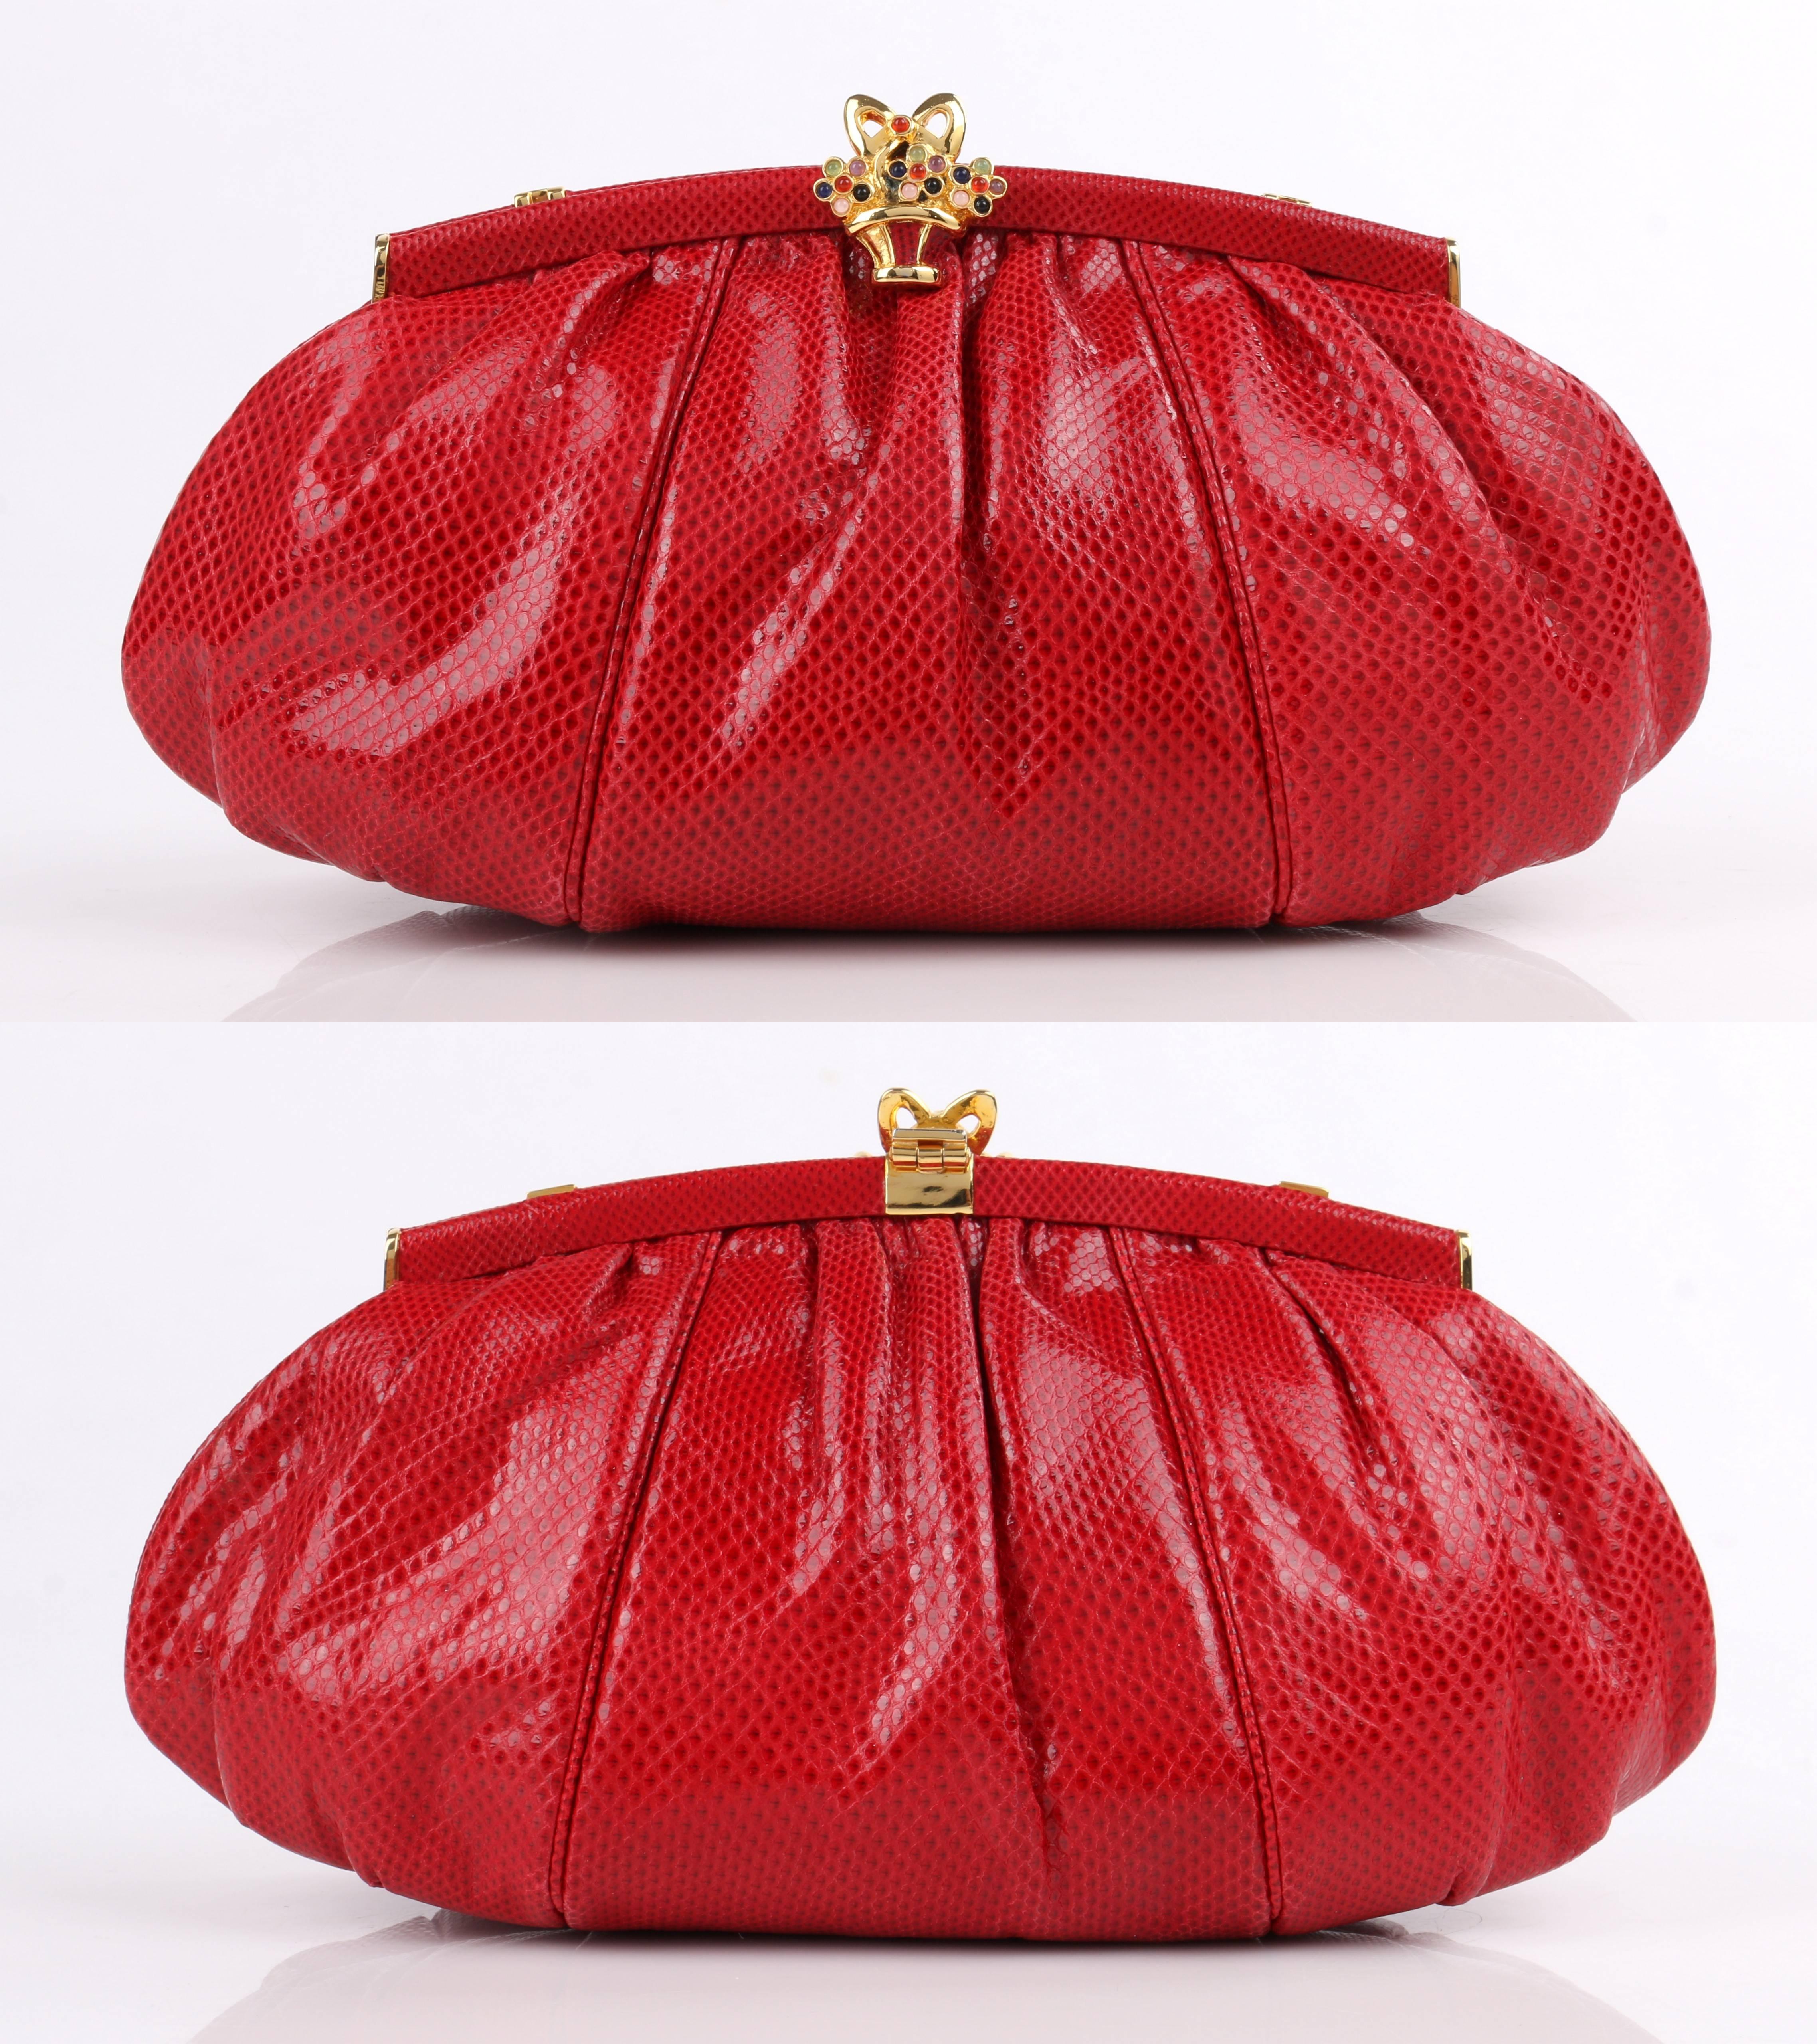 Vintage Judith Leiber c.1980's red lizard skin leather frame top evening bag. Red lizard skin exterior gathered into frame at top with piped detail. Leather covered gold-toned metal arched frame top. Gold-toned metal flower basket and bow hinge top